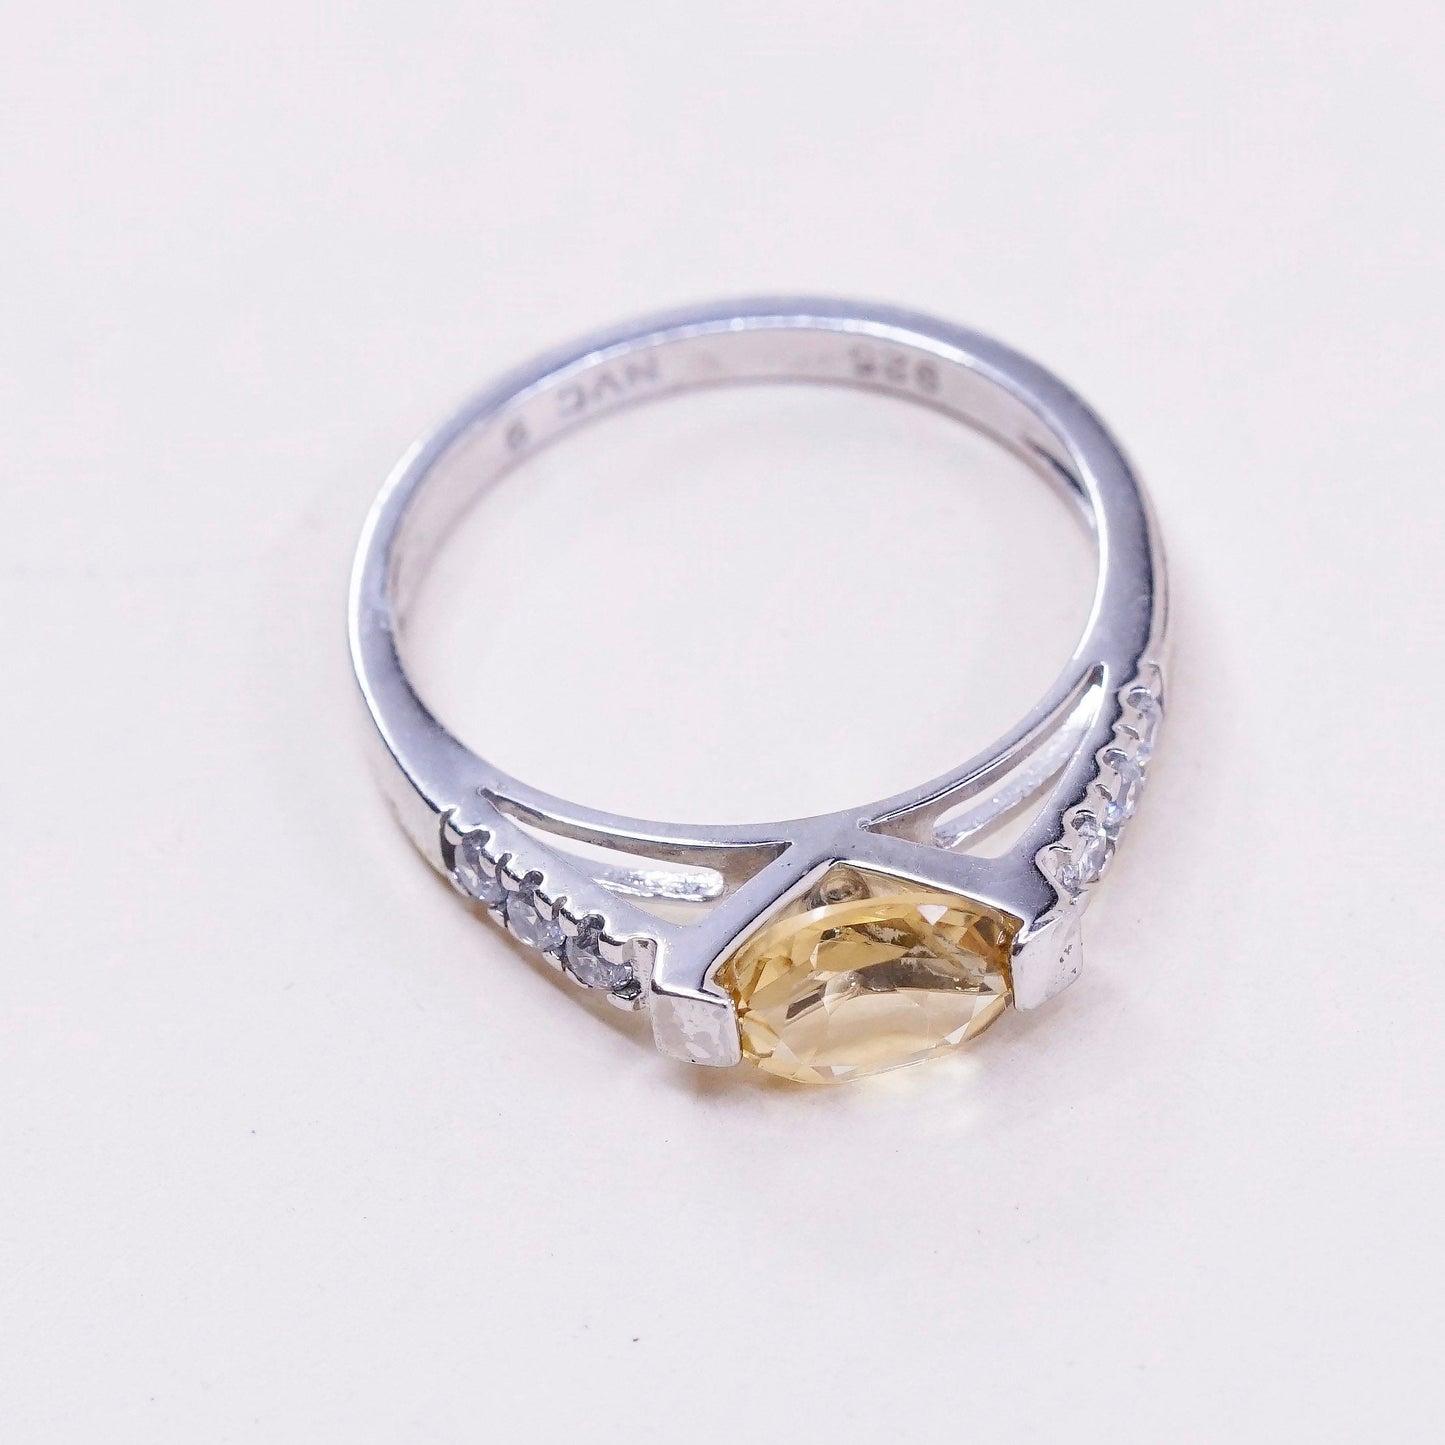 Size 9.25, vintage NVC Sterling silver ring, 925 with citrine and cz